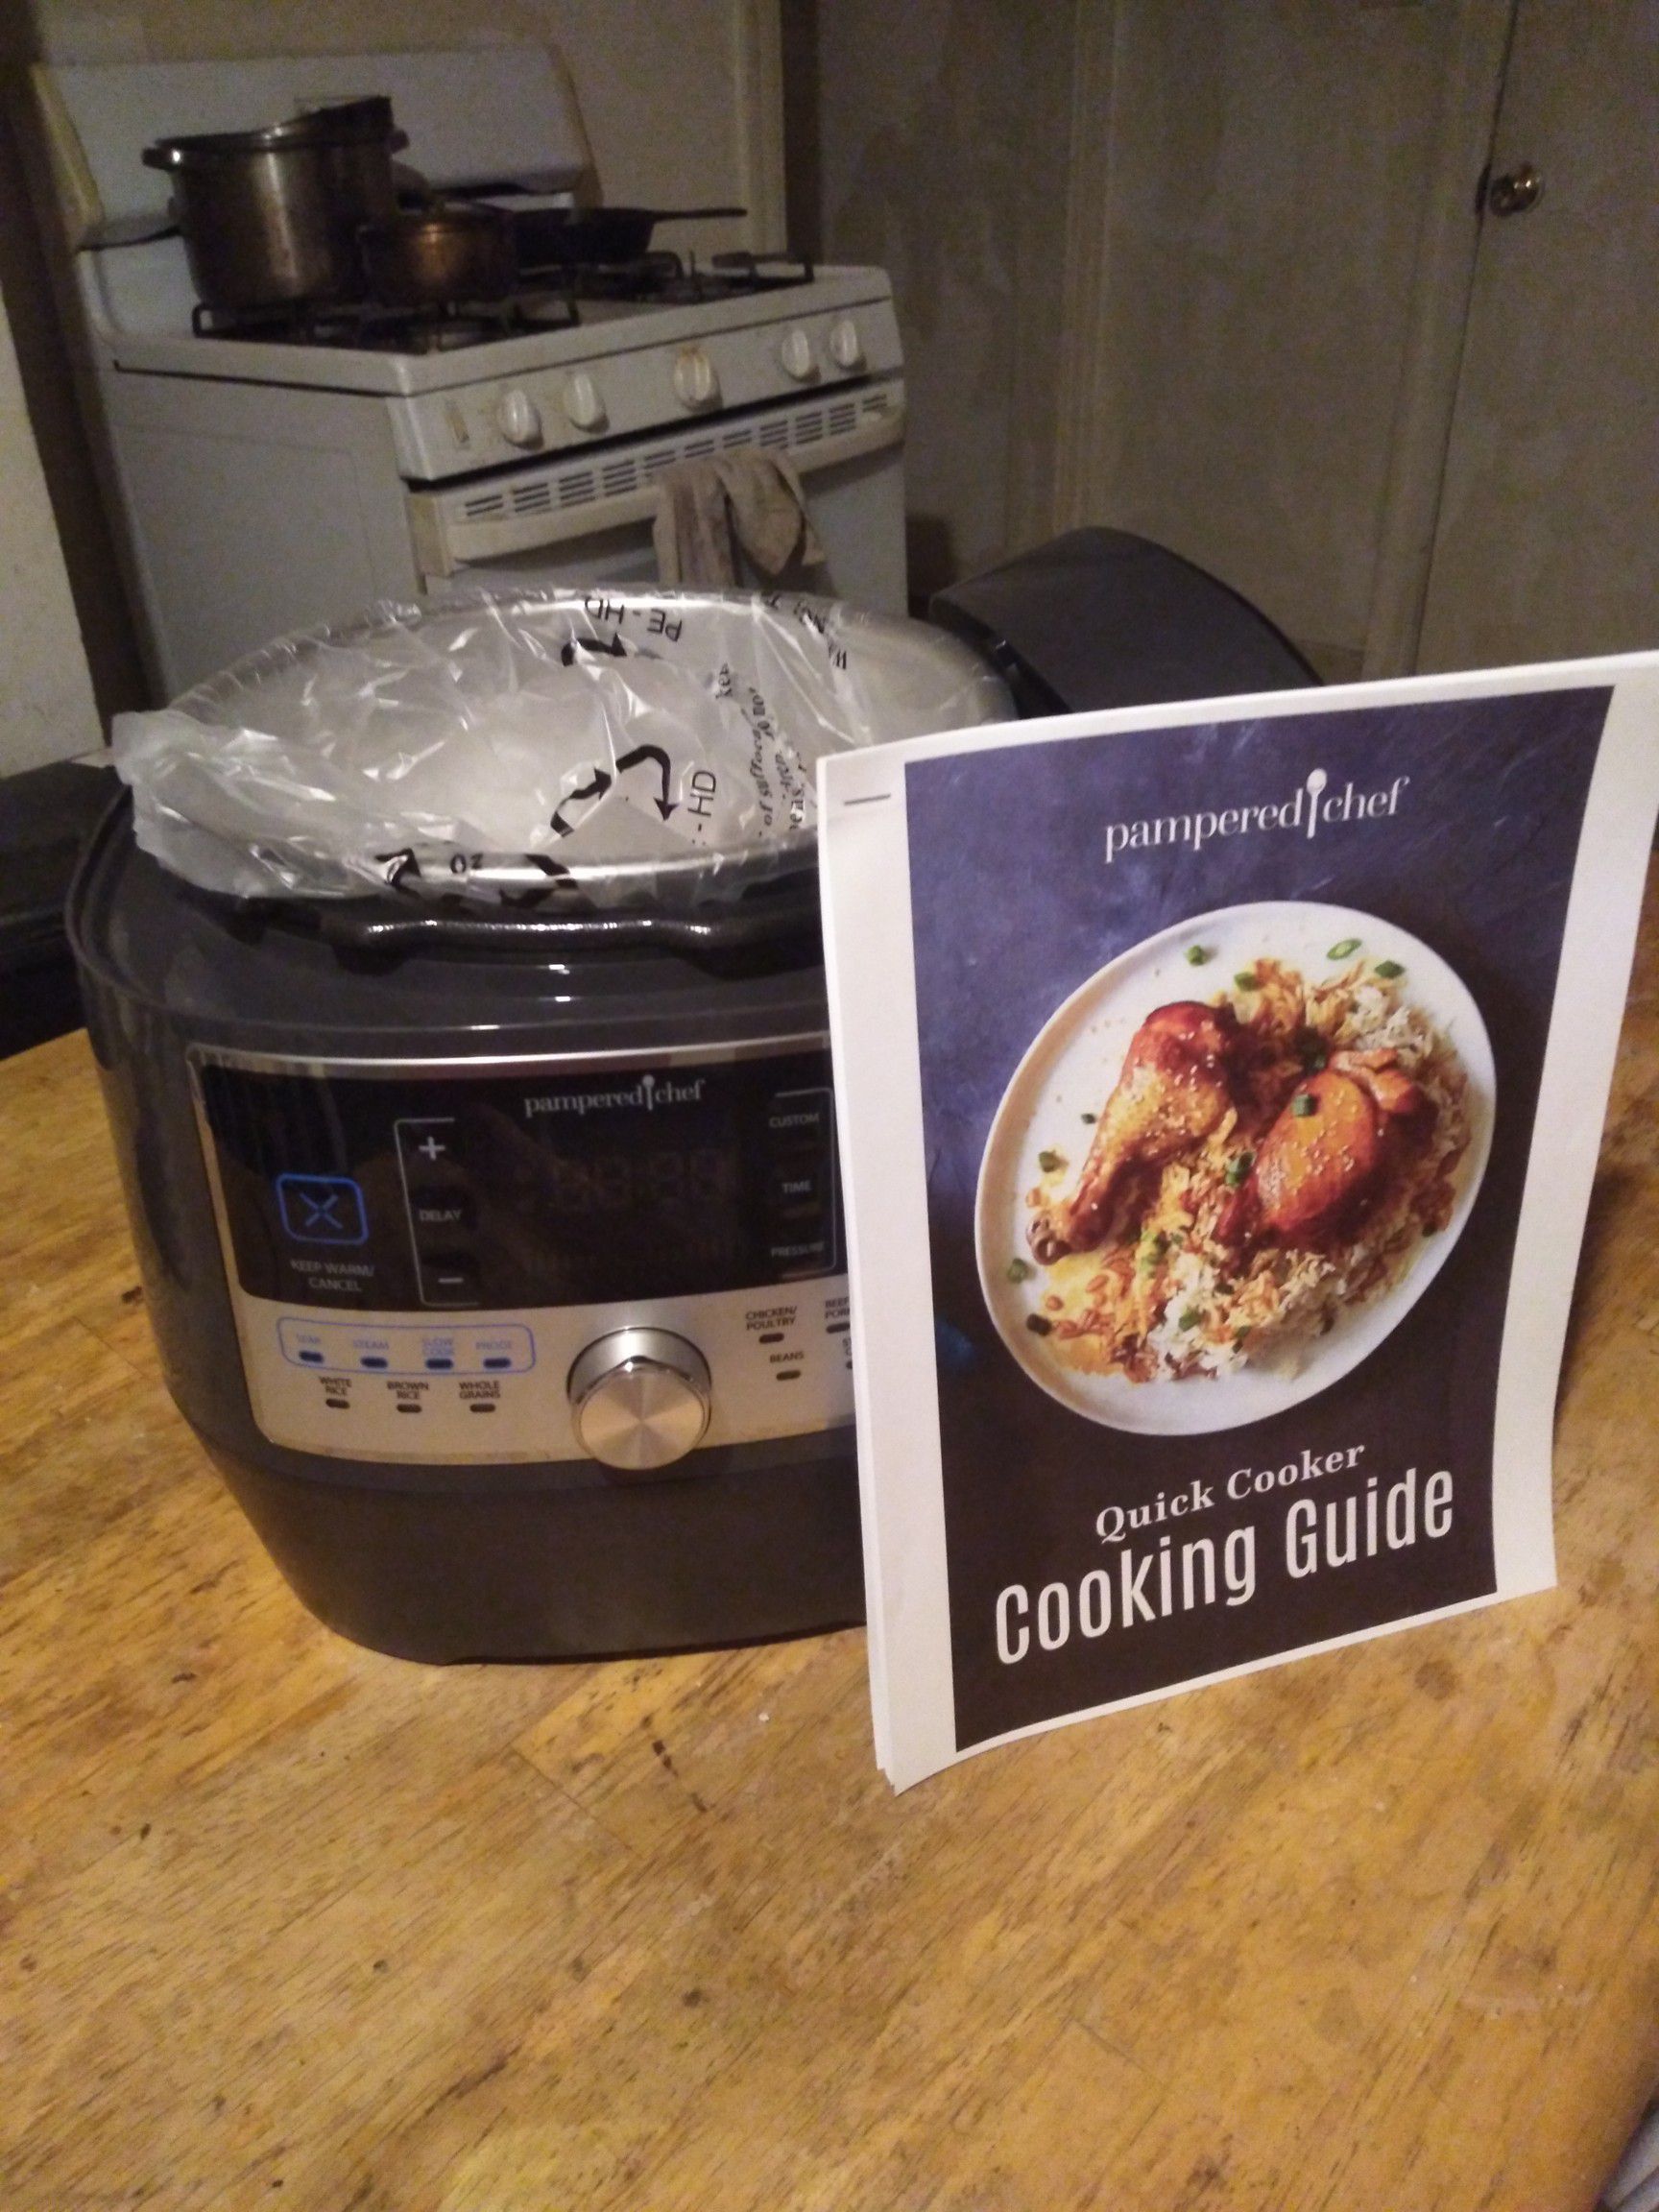 Pampered Chef Quick Cooker